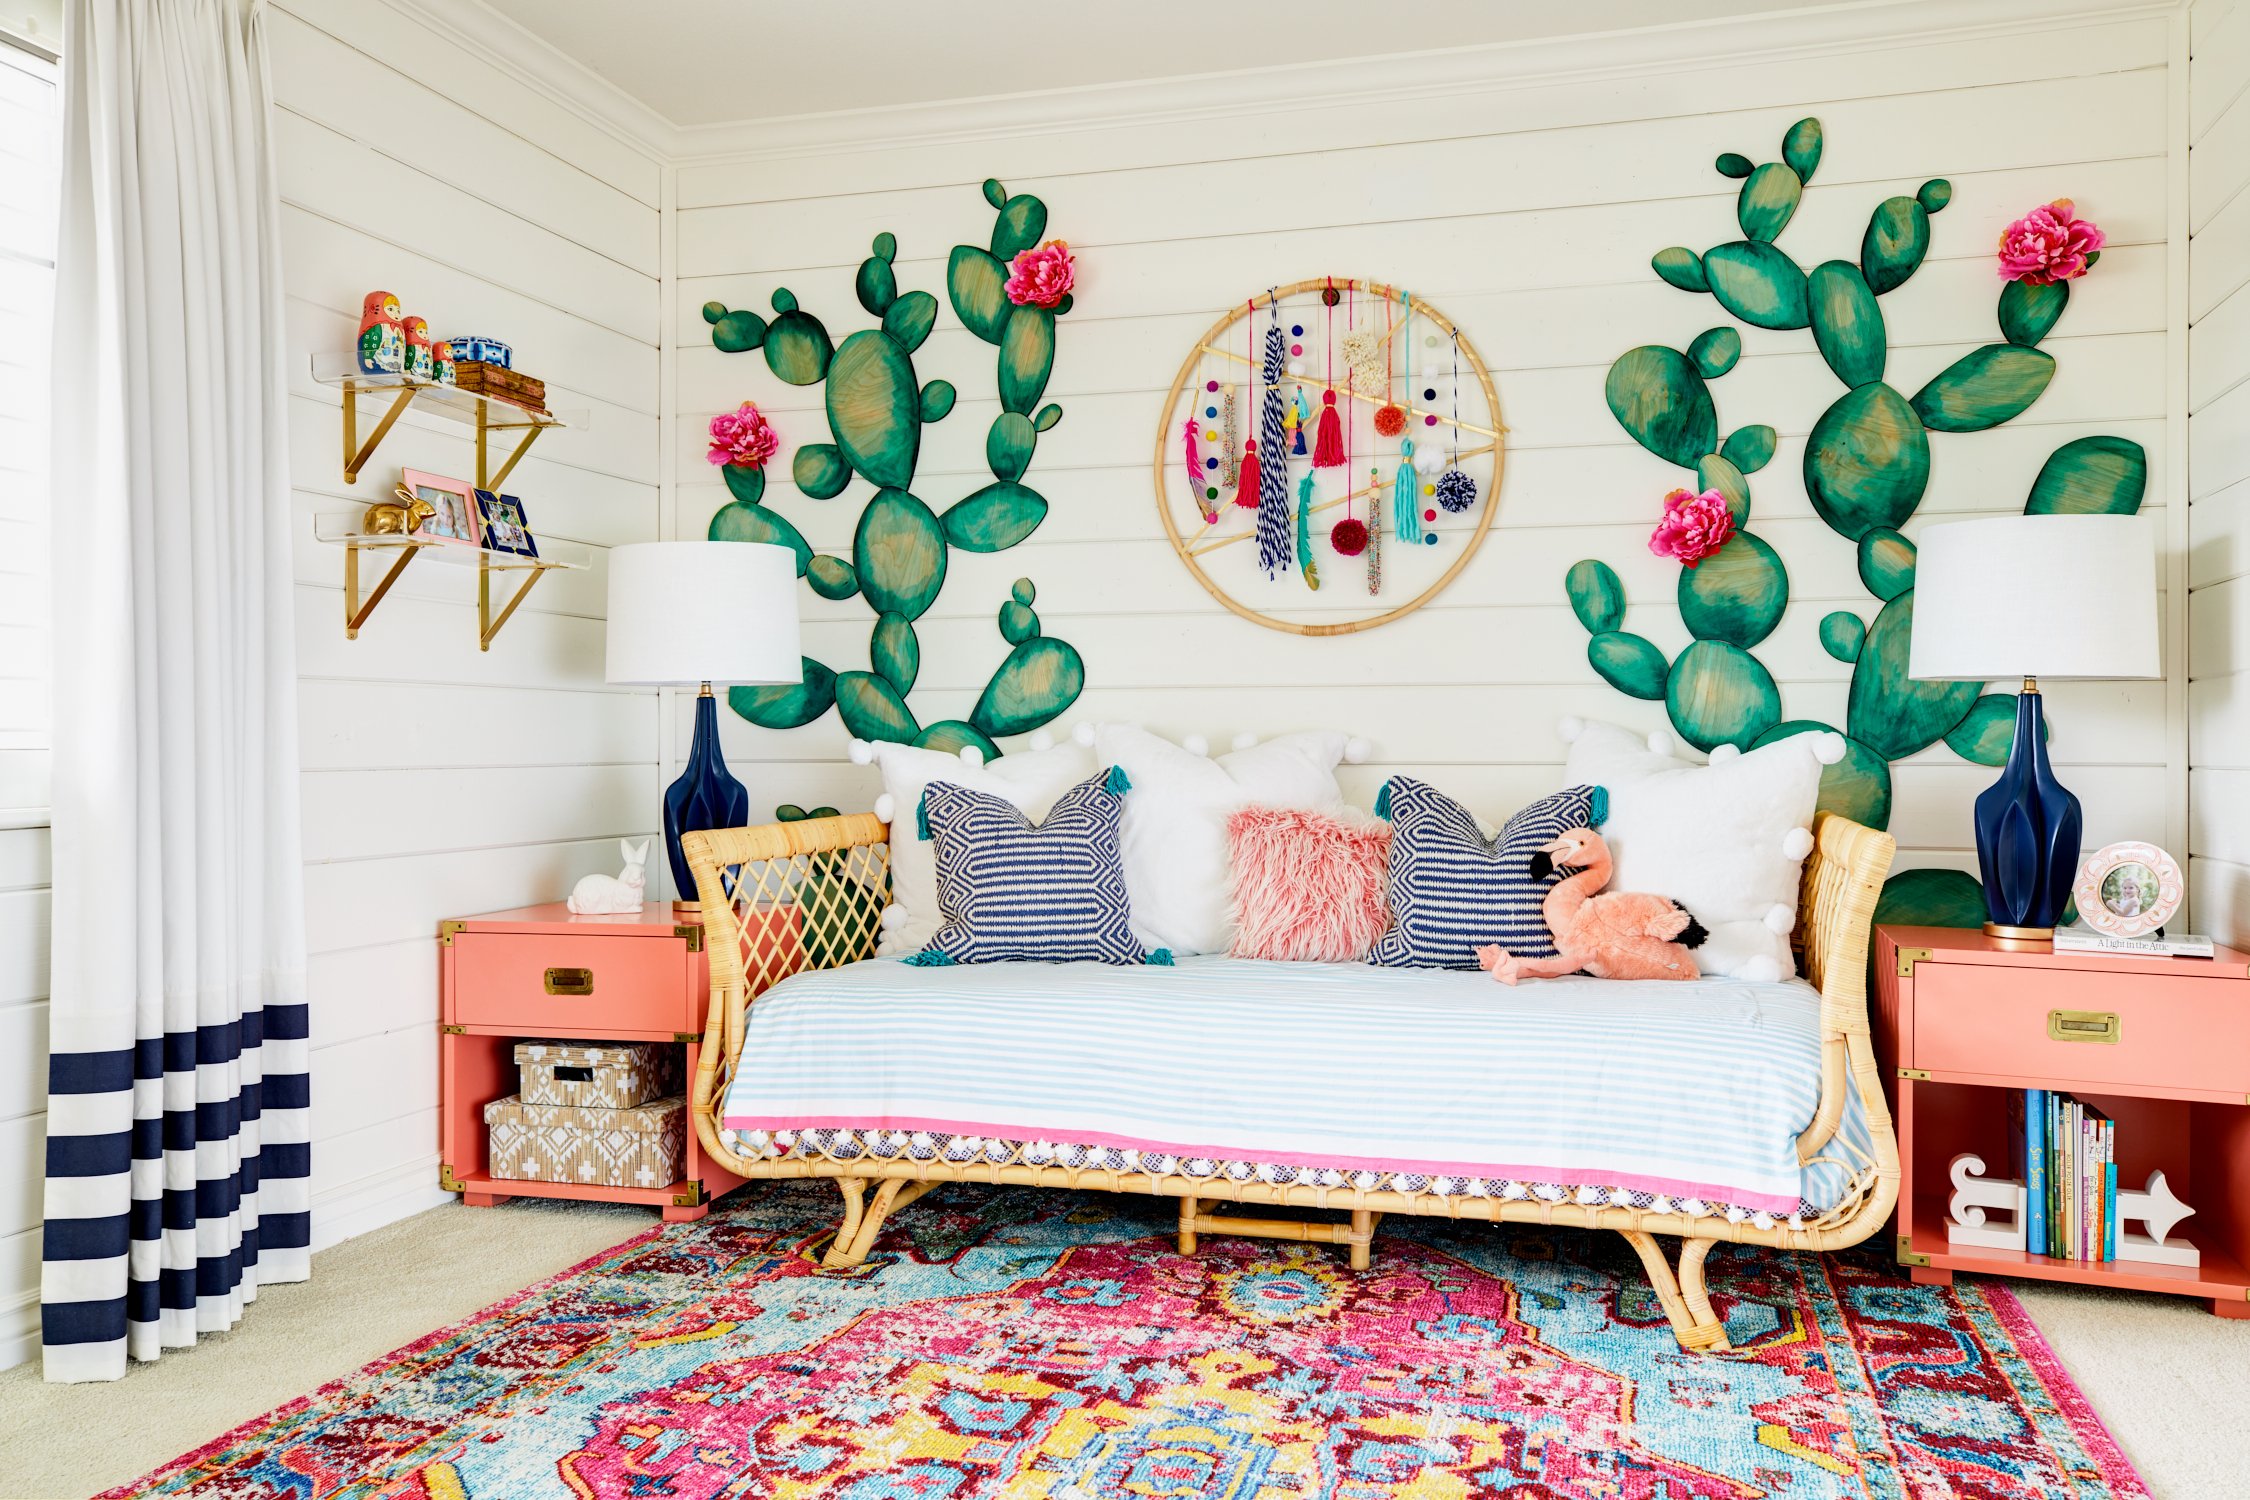 Boho Girl's Room with Cactus Accent Wall and Modern Colorful Dreamcatcher